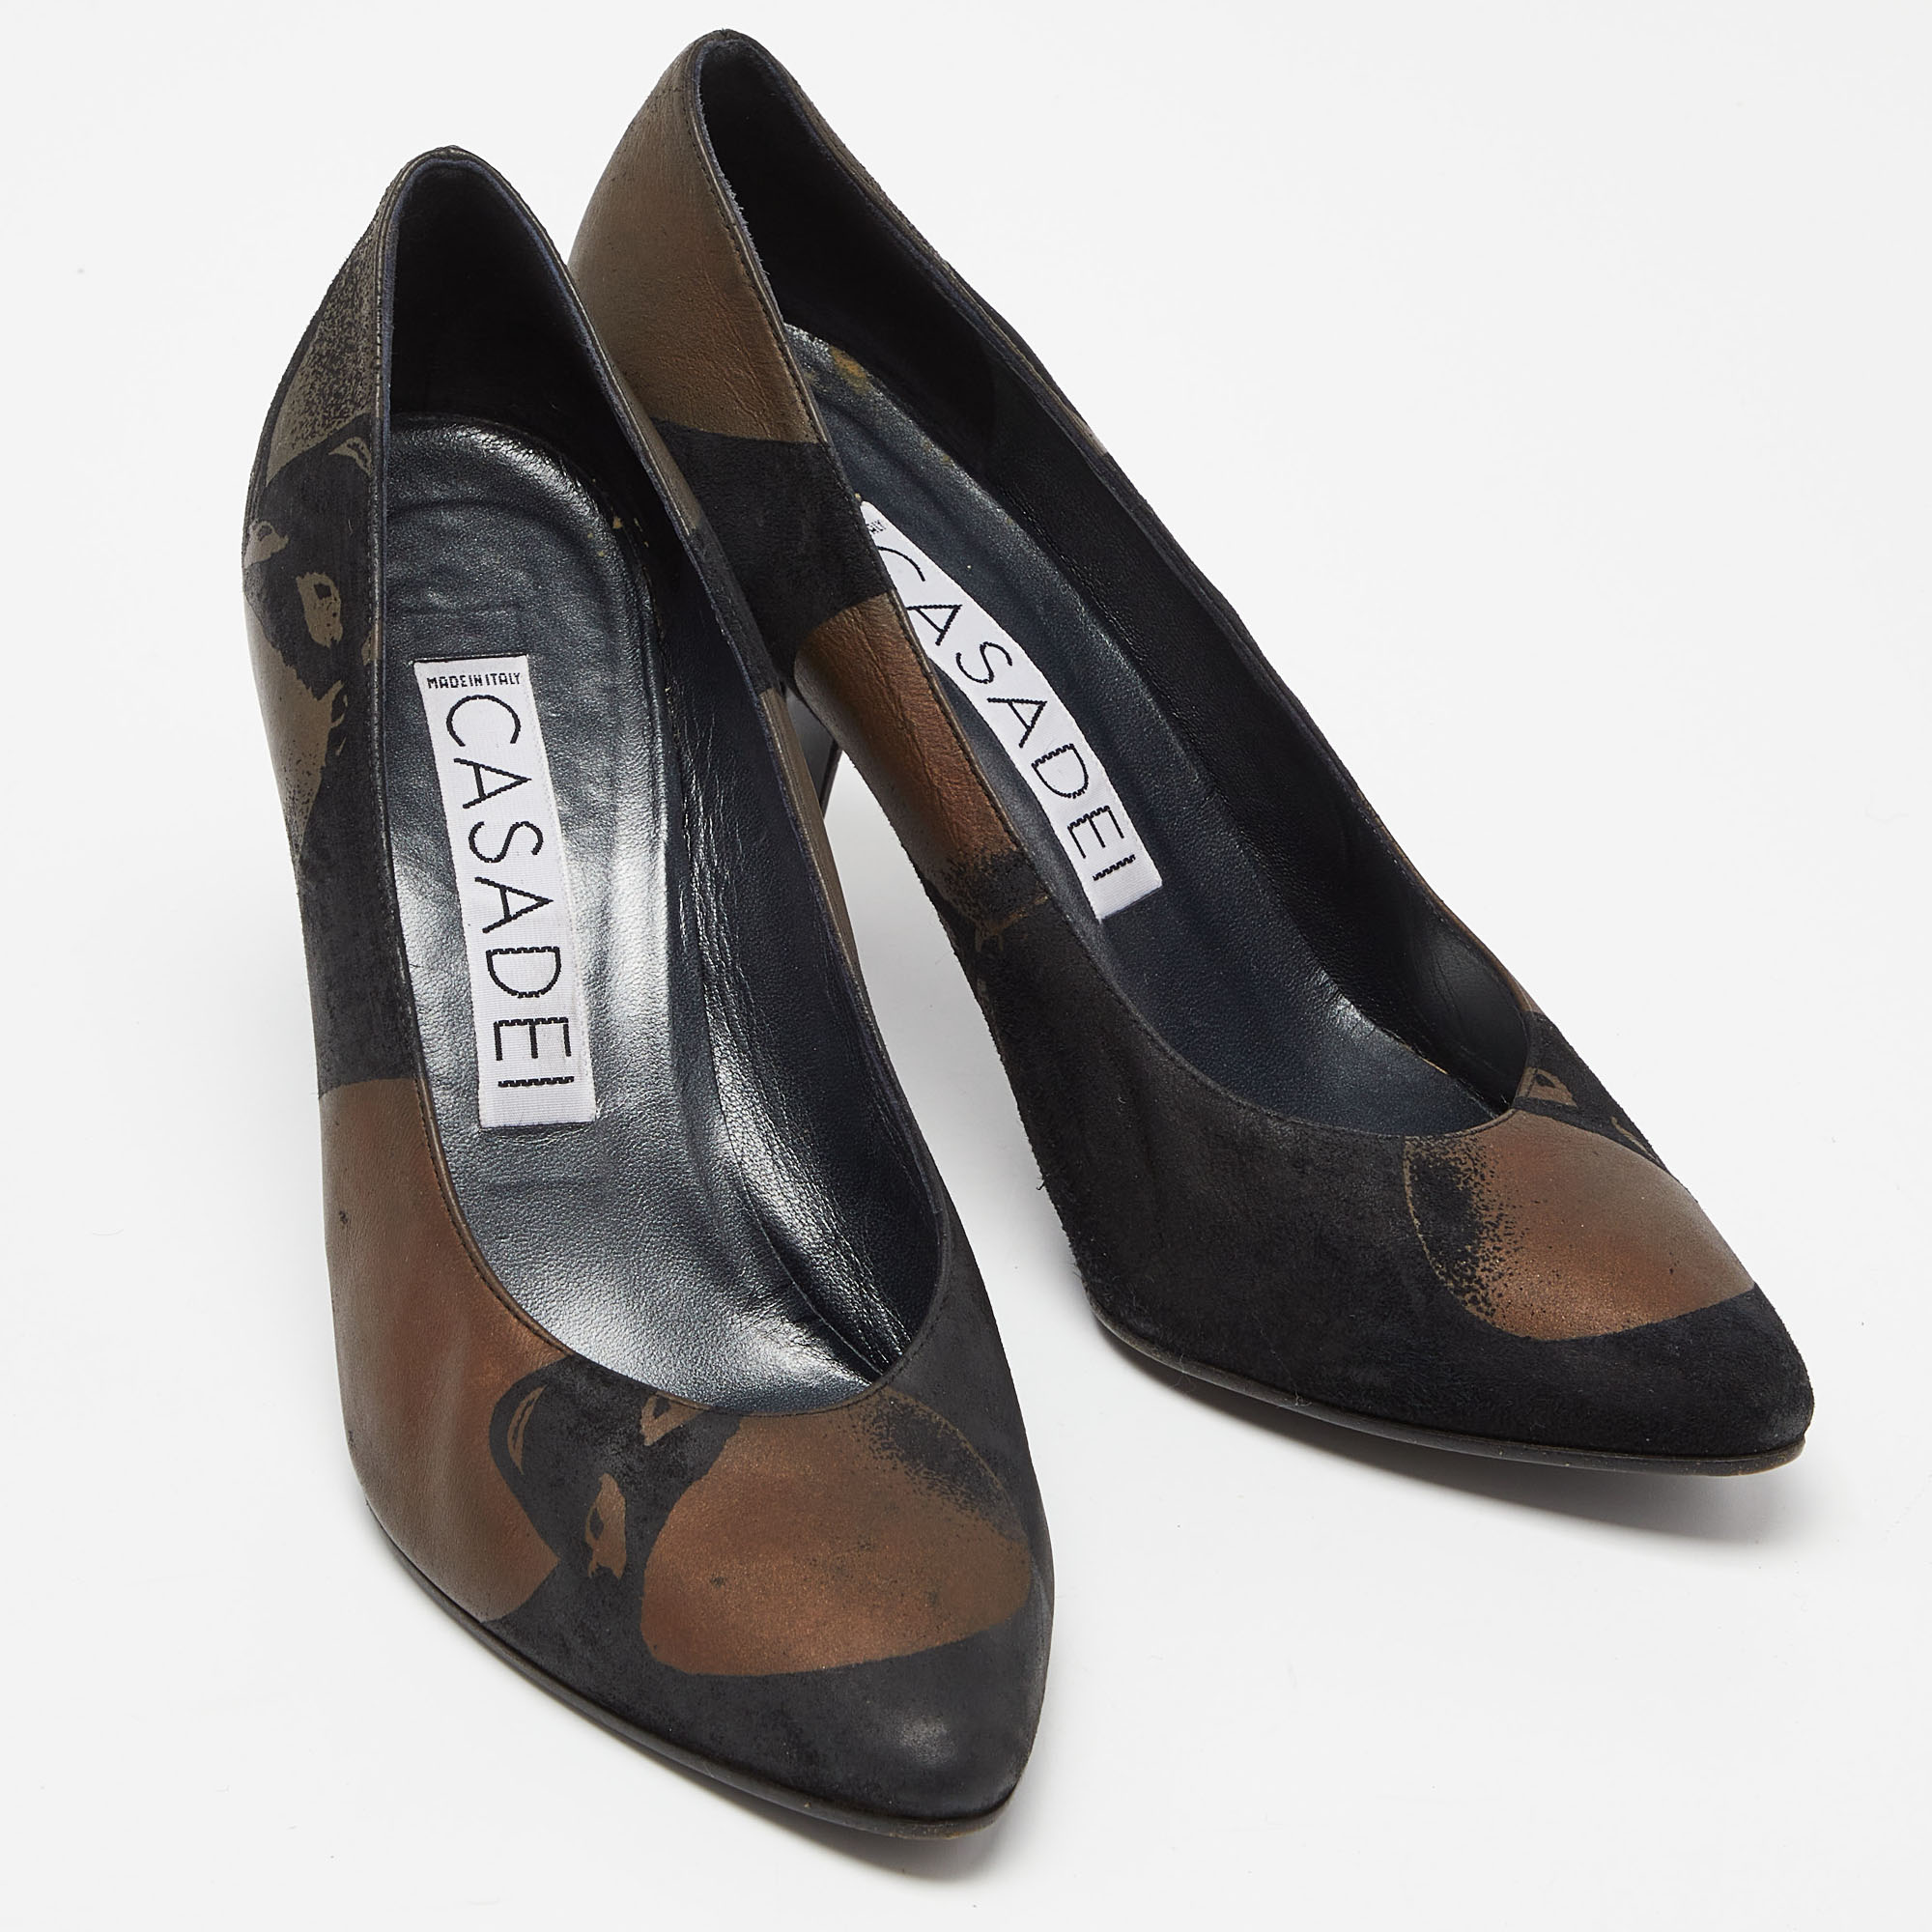 Casadei Black/Brown Printed Nubuck Leather Pointed Toe Pumps Size 39